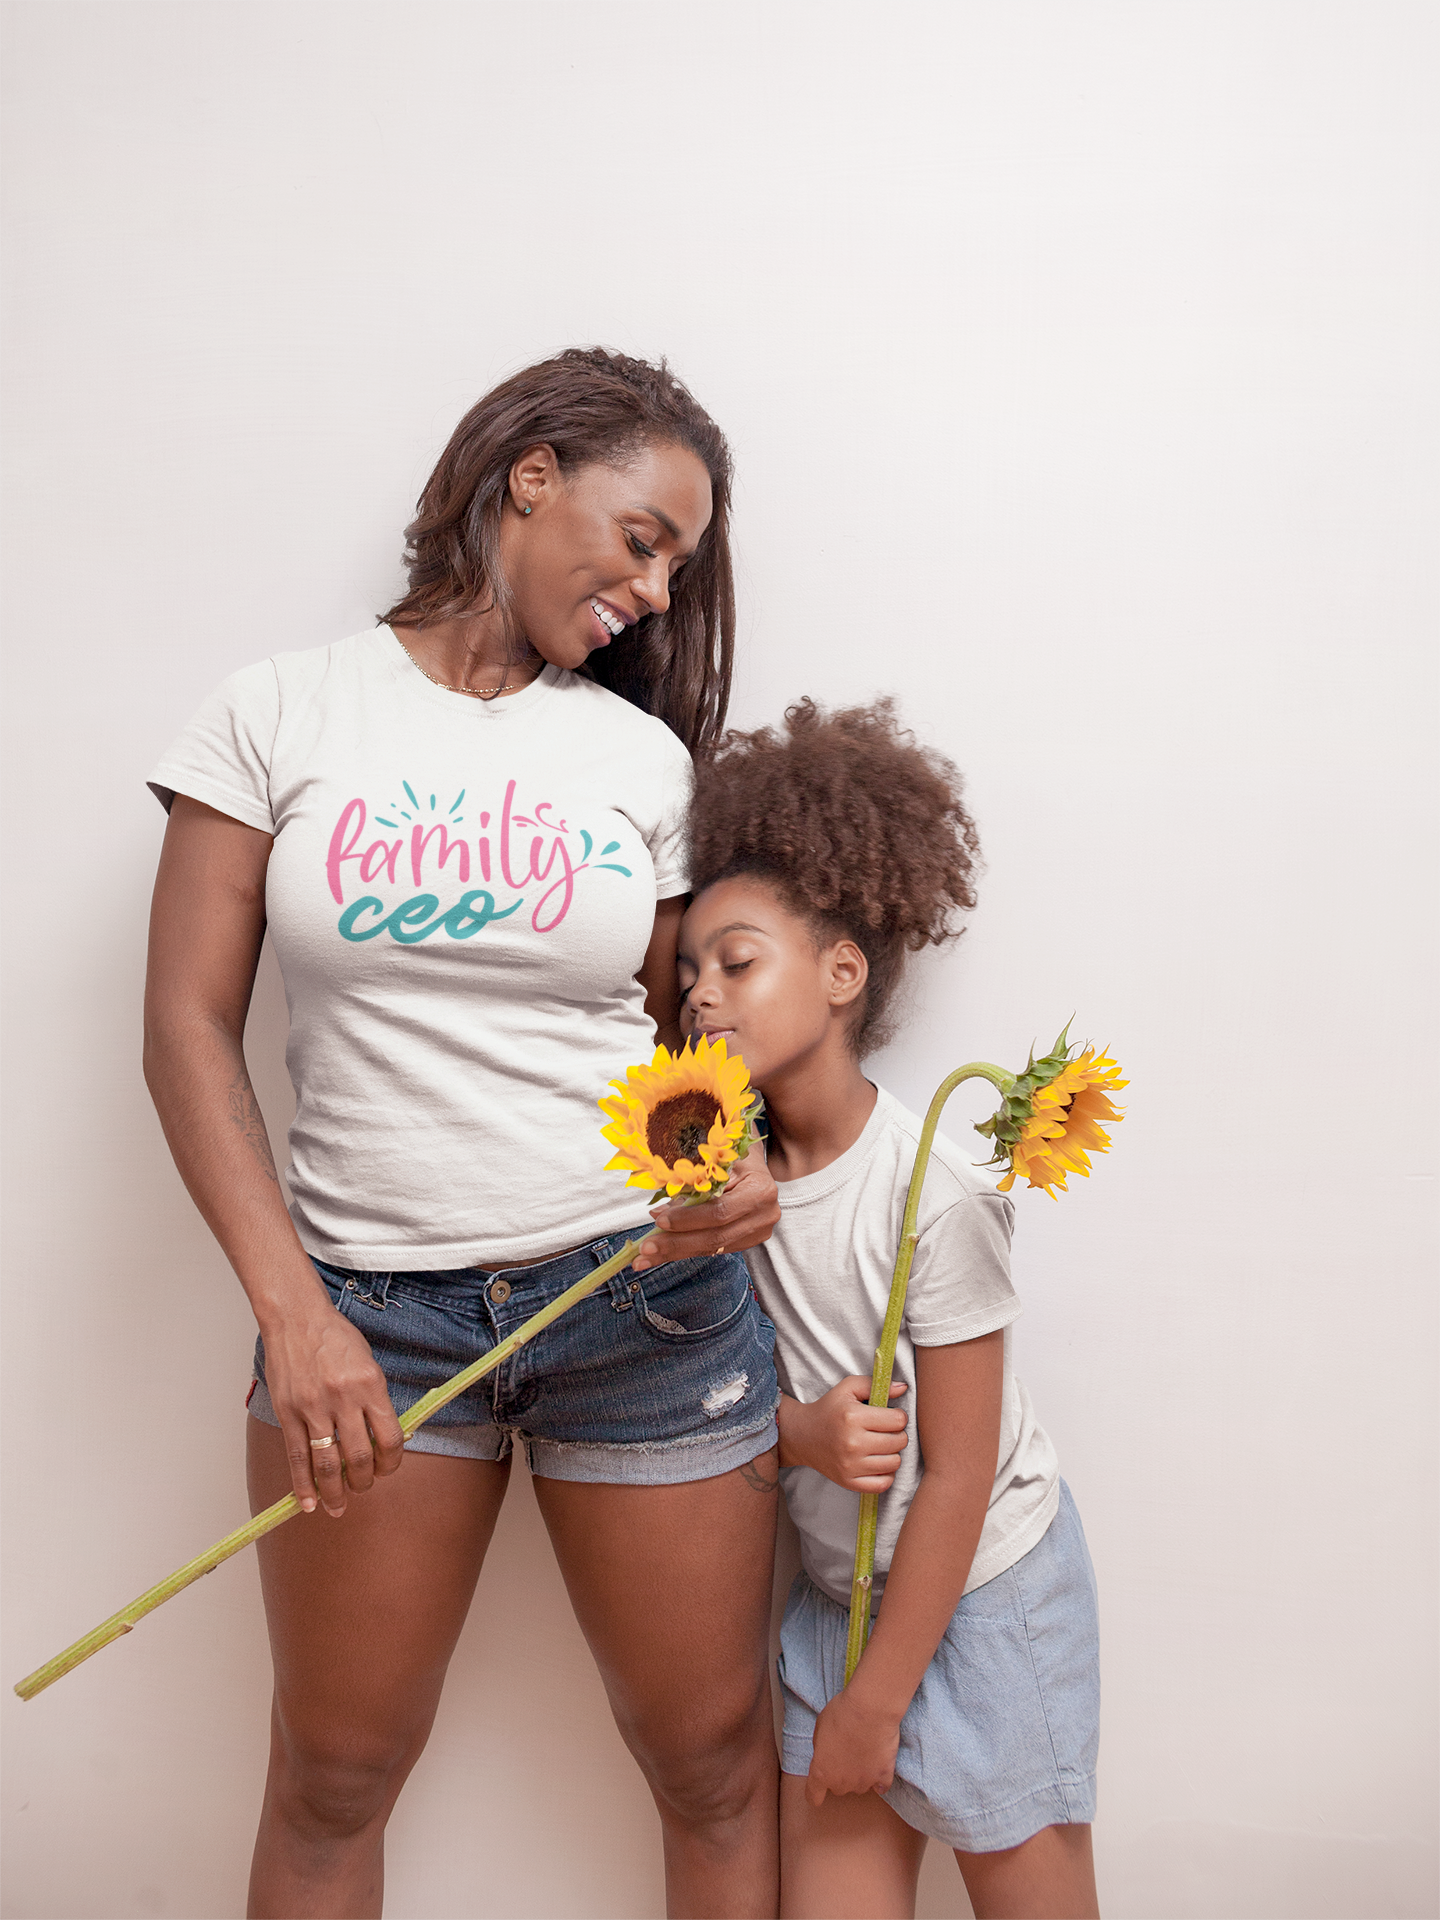 FAMILY CEO "Mother's Day Quote" T-Shirt